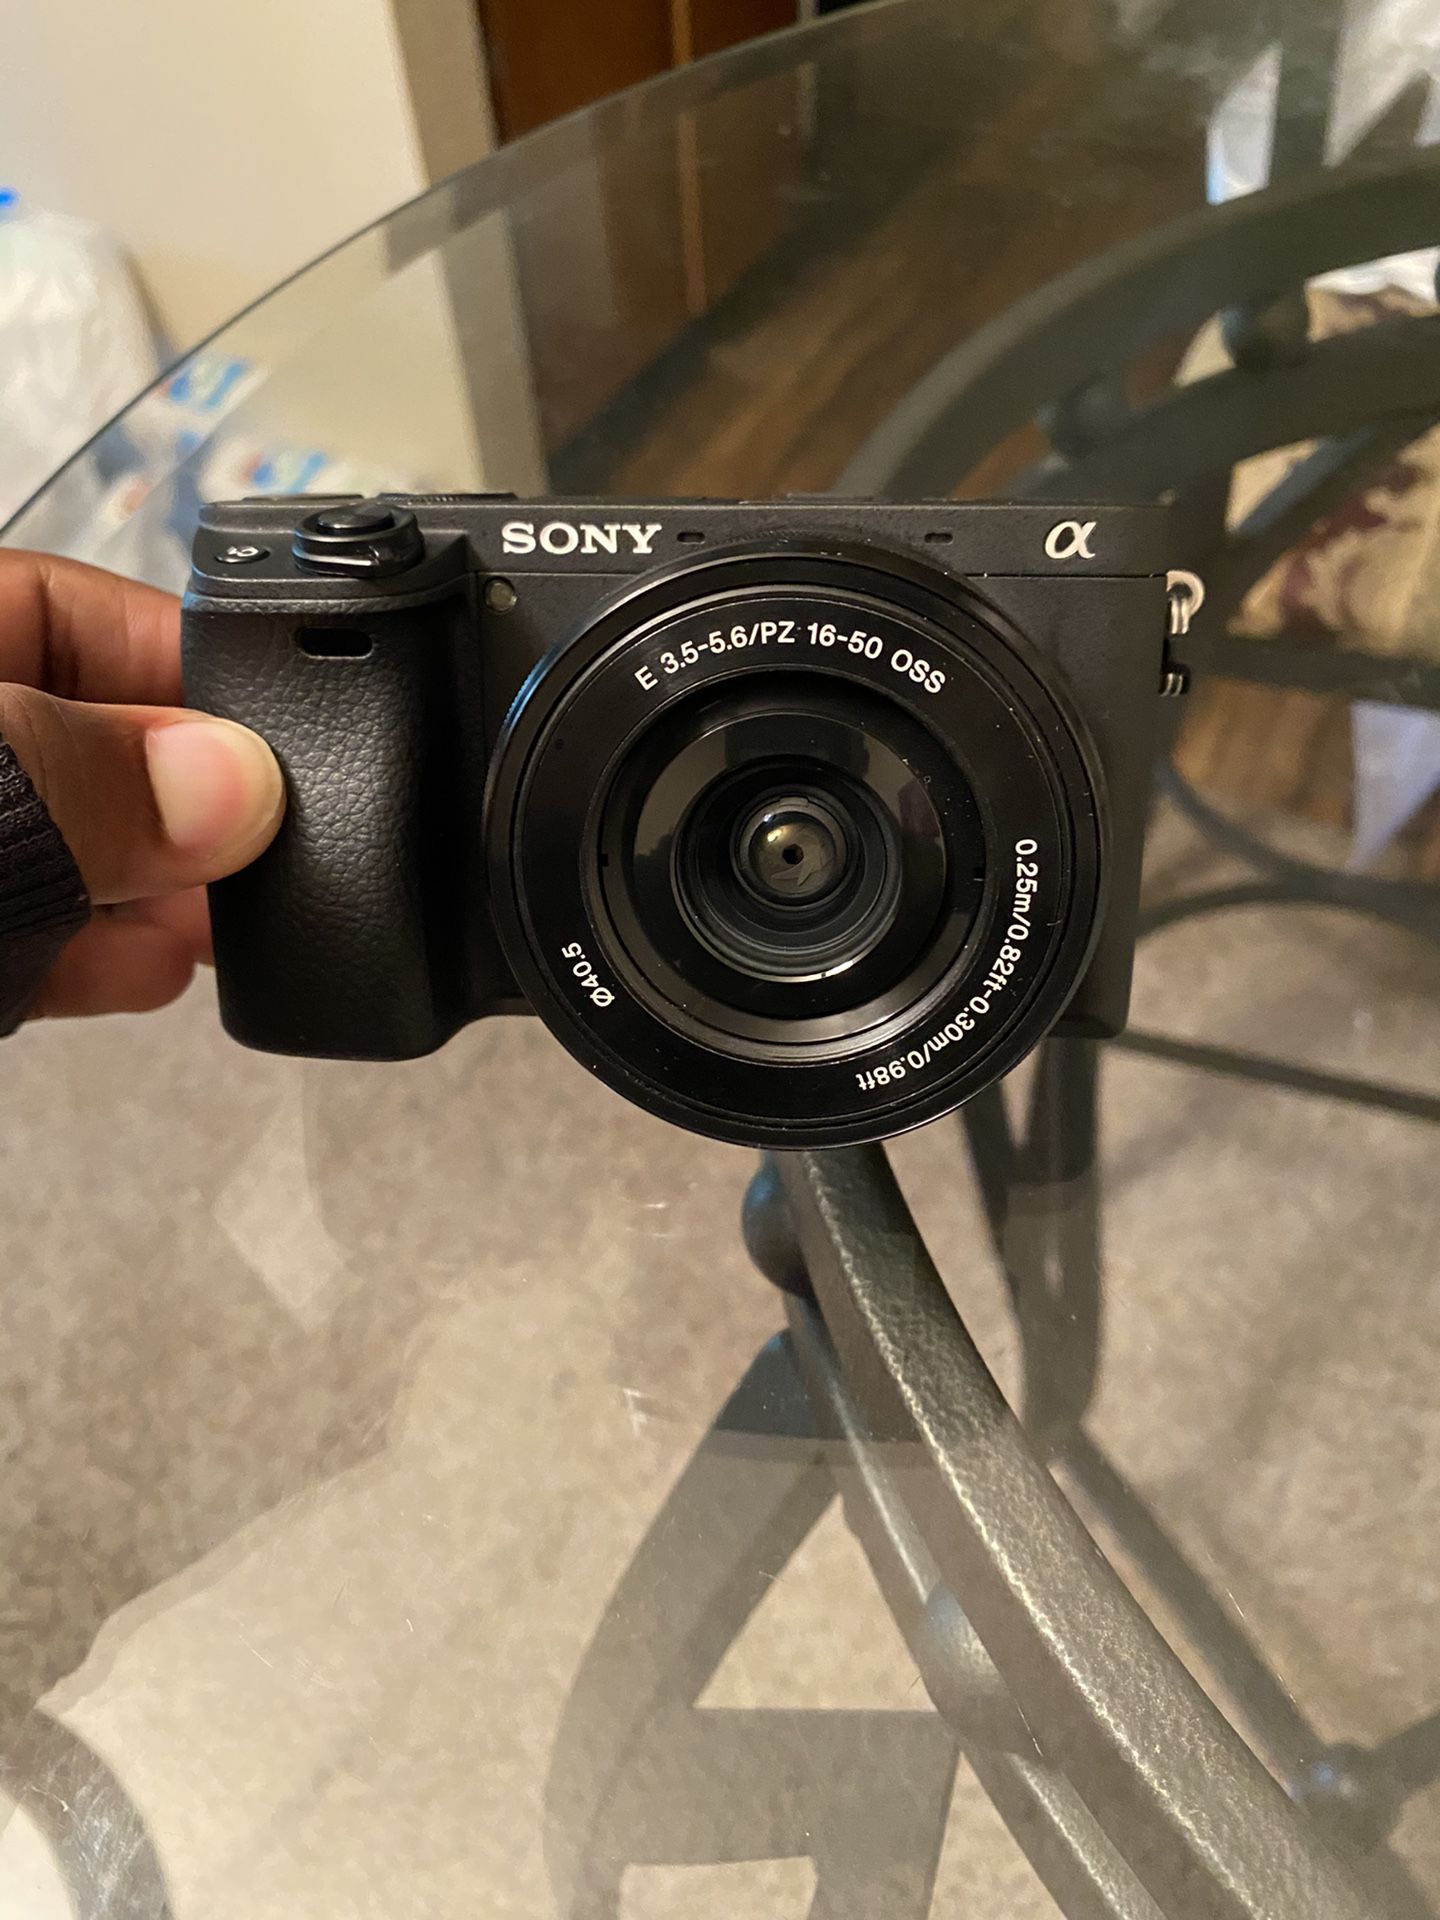 Sony a6400 4K camera with charger and SD card